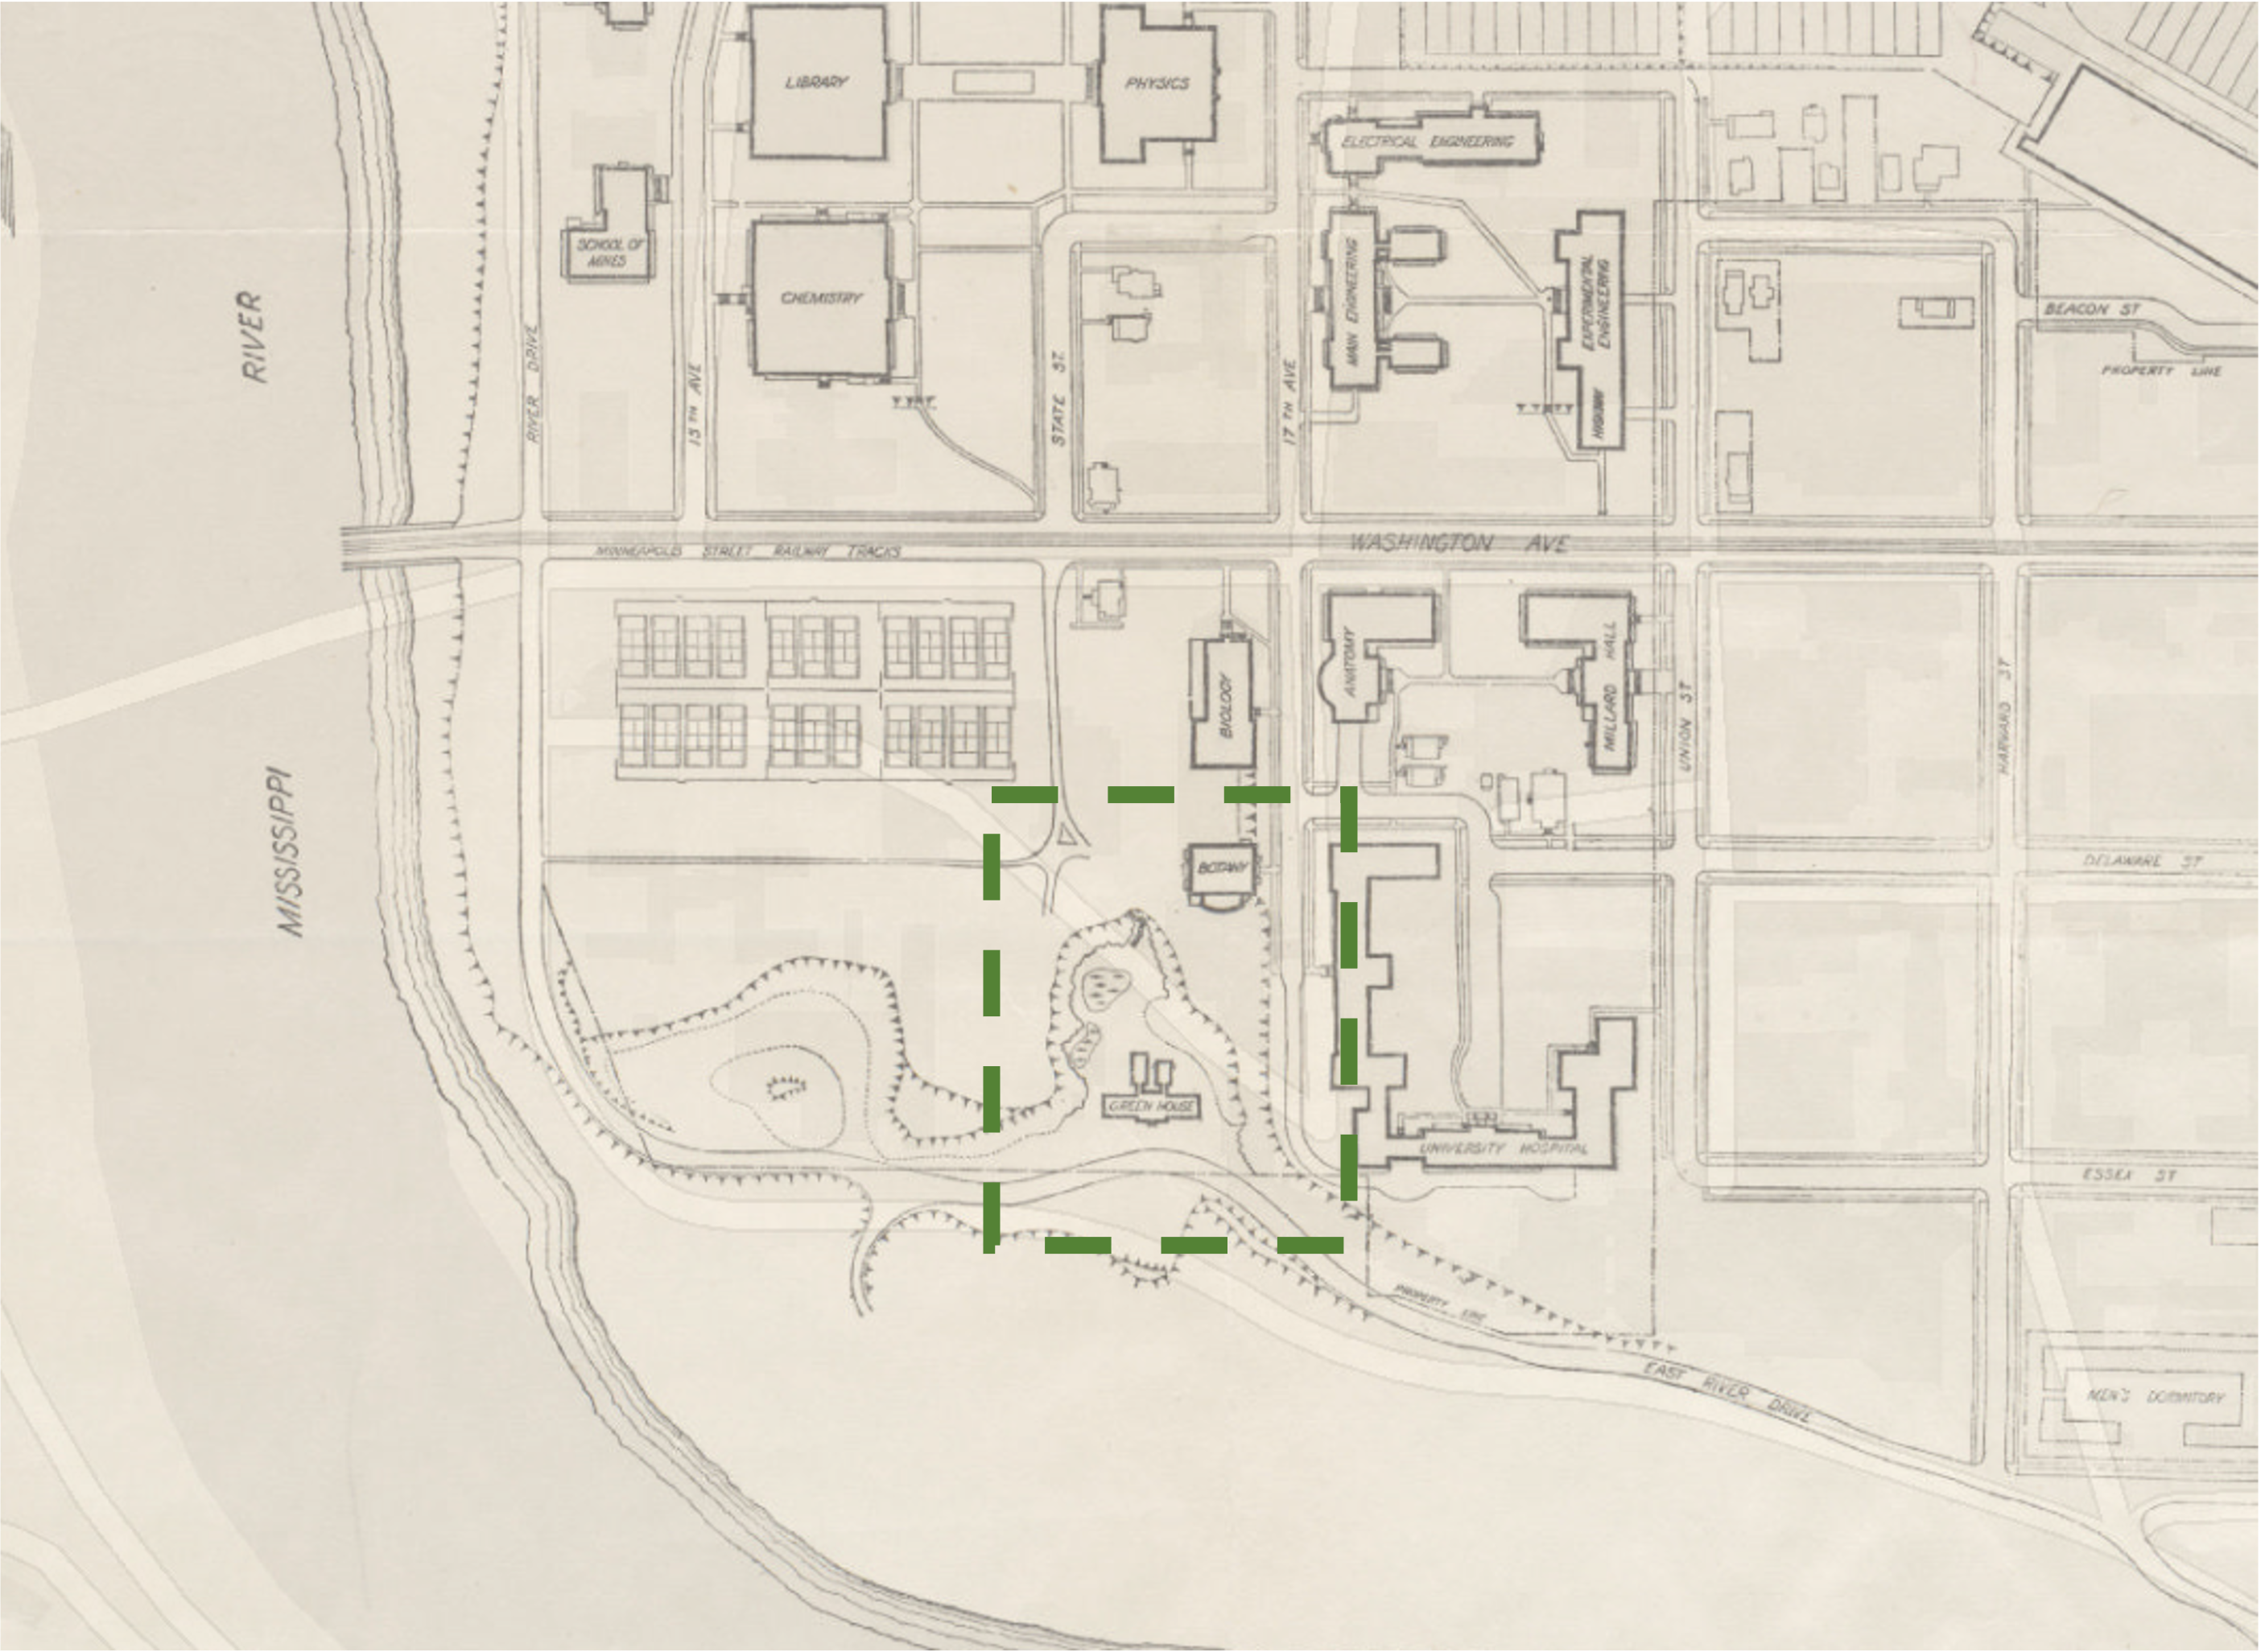 Map of the university's campus with the Botany Building and Botany Greenhouses higlighted in green